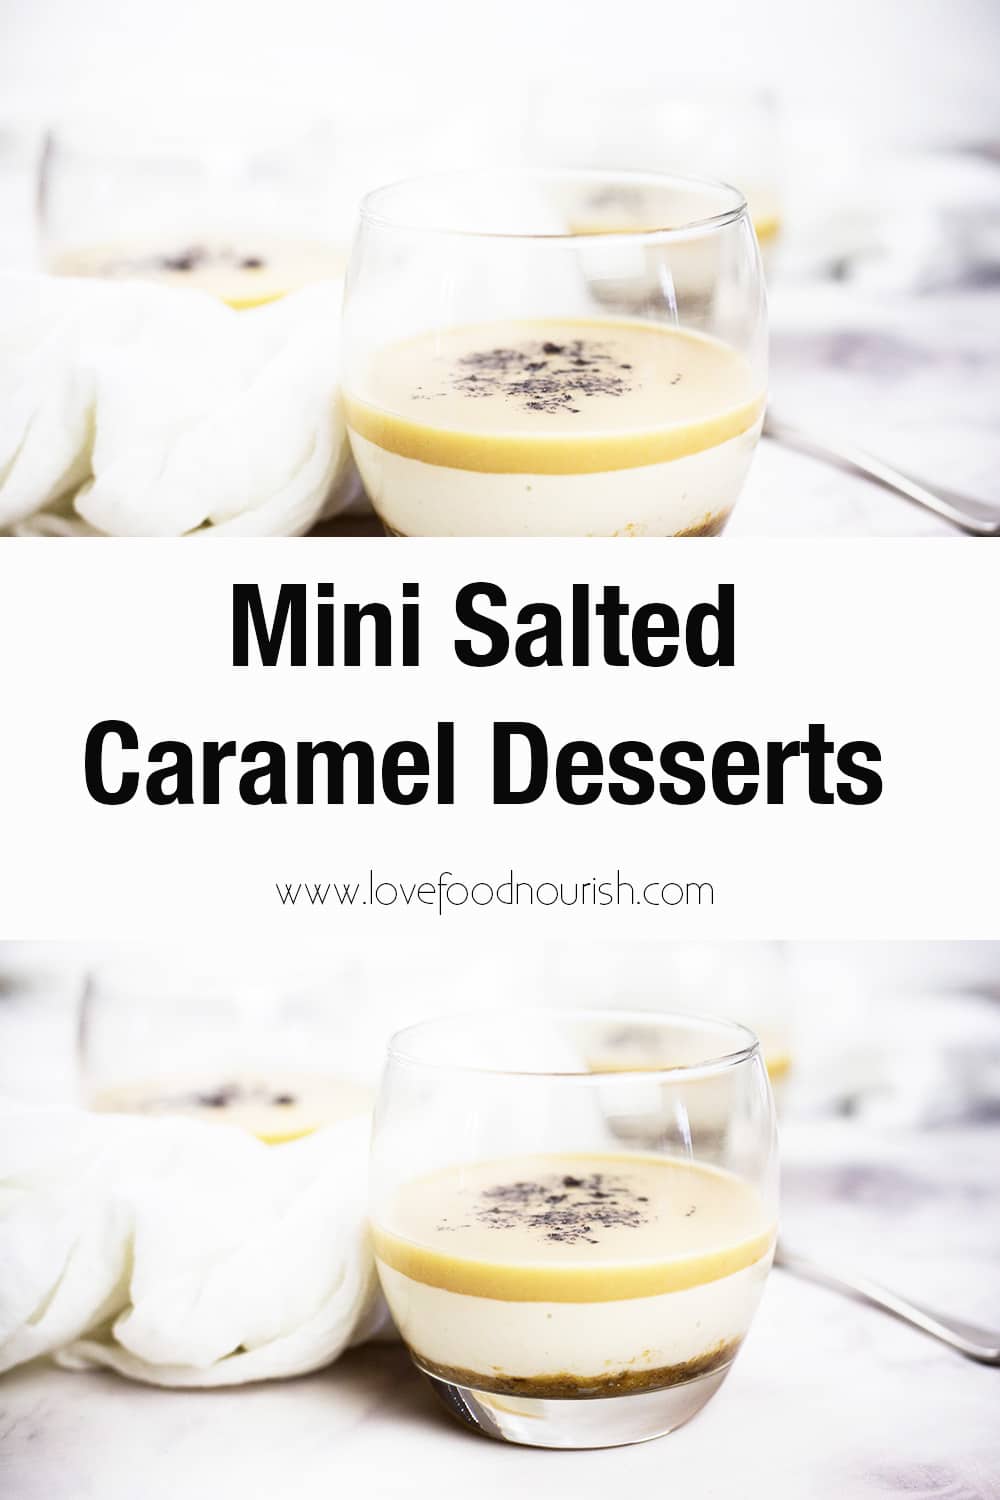 Salted caramel desserts in glasses with white cloth behind. Text overlay saying mini salted caramel desserts.